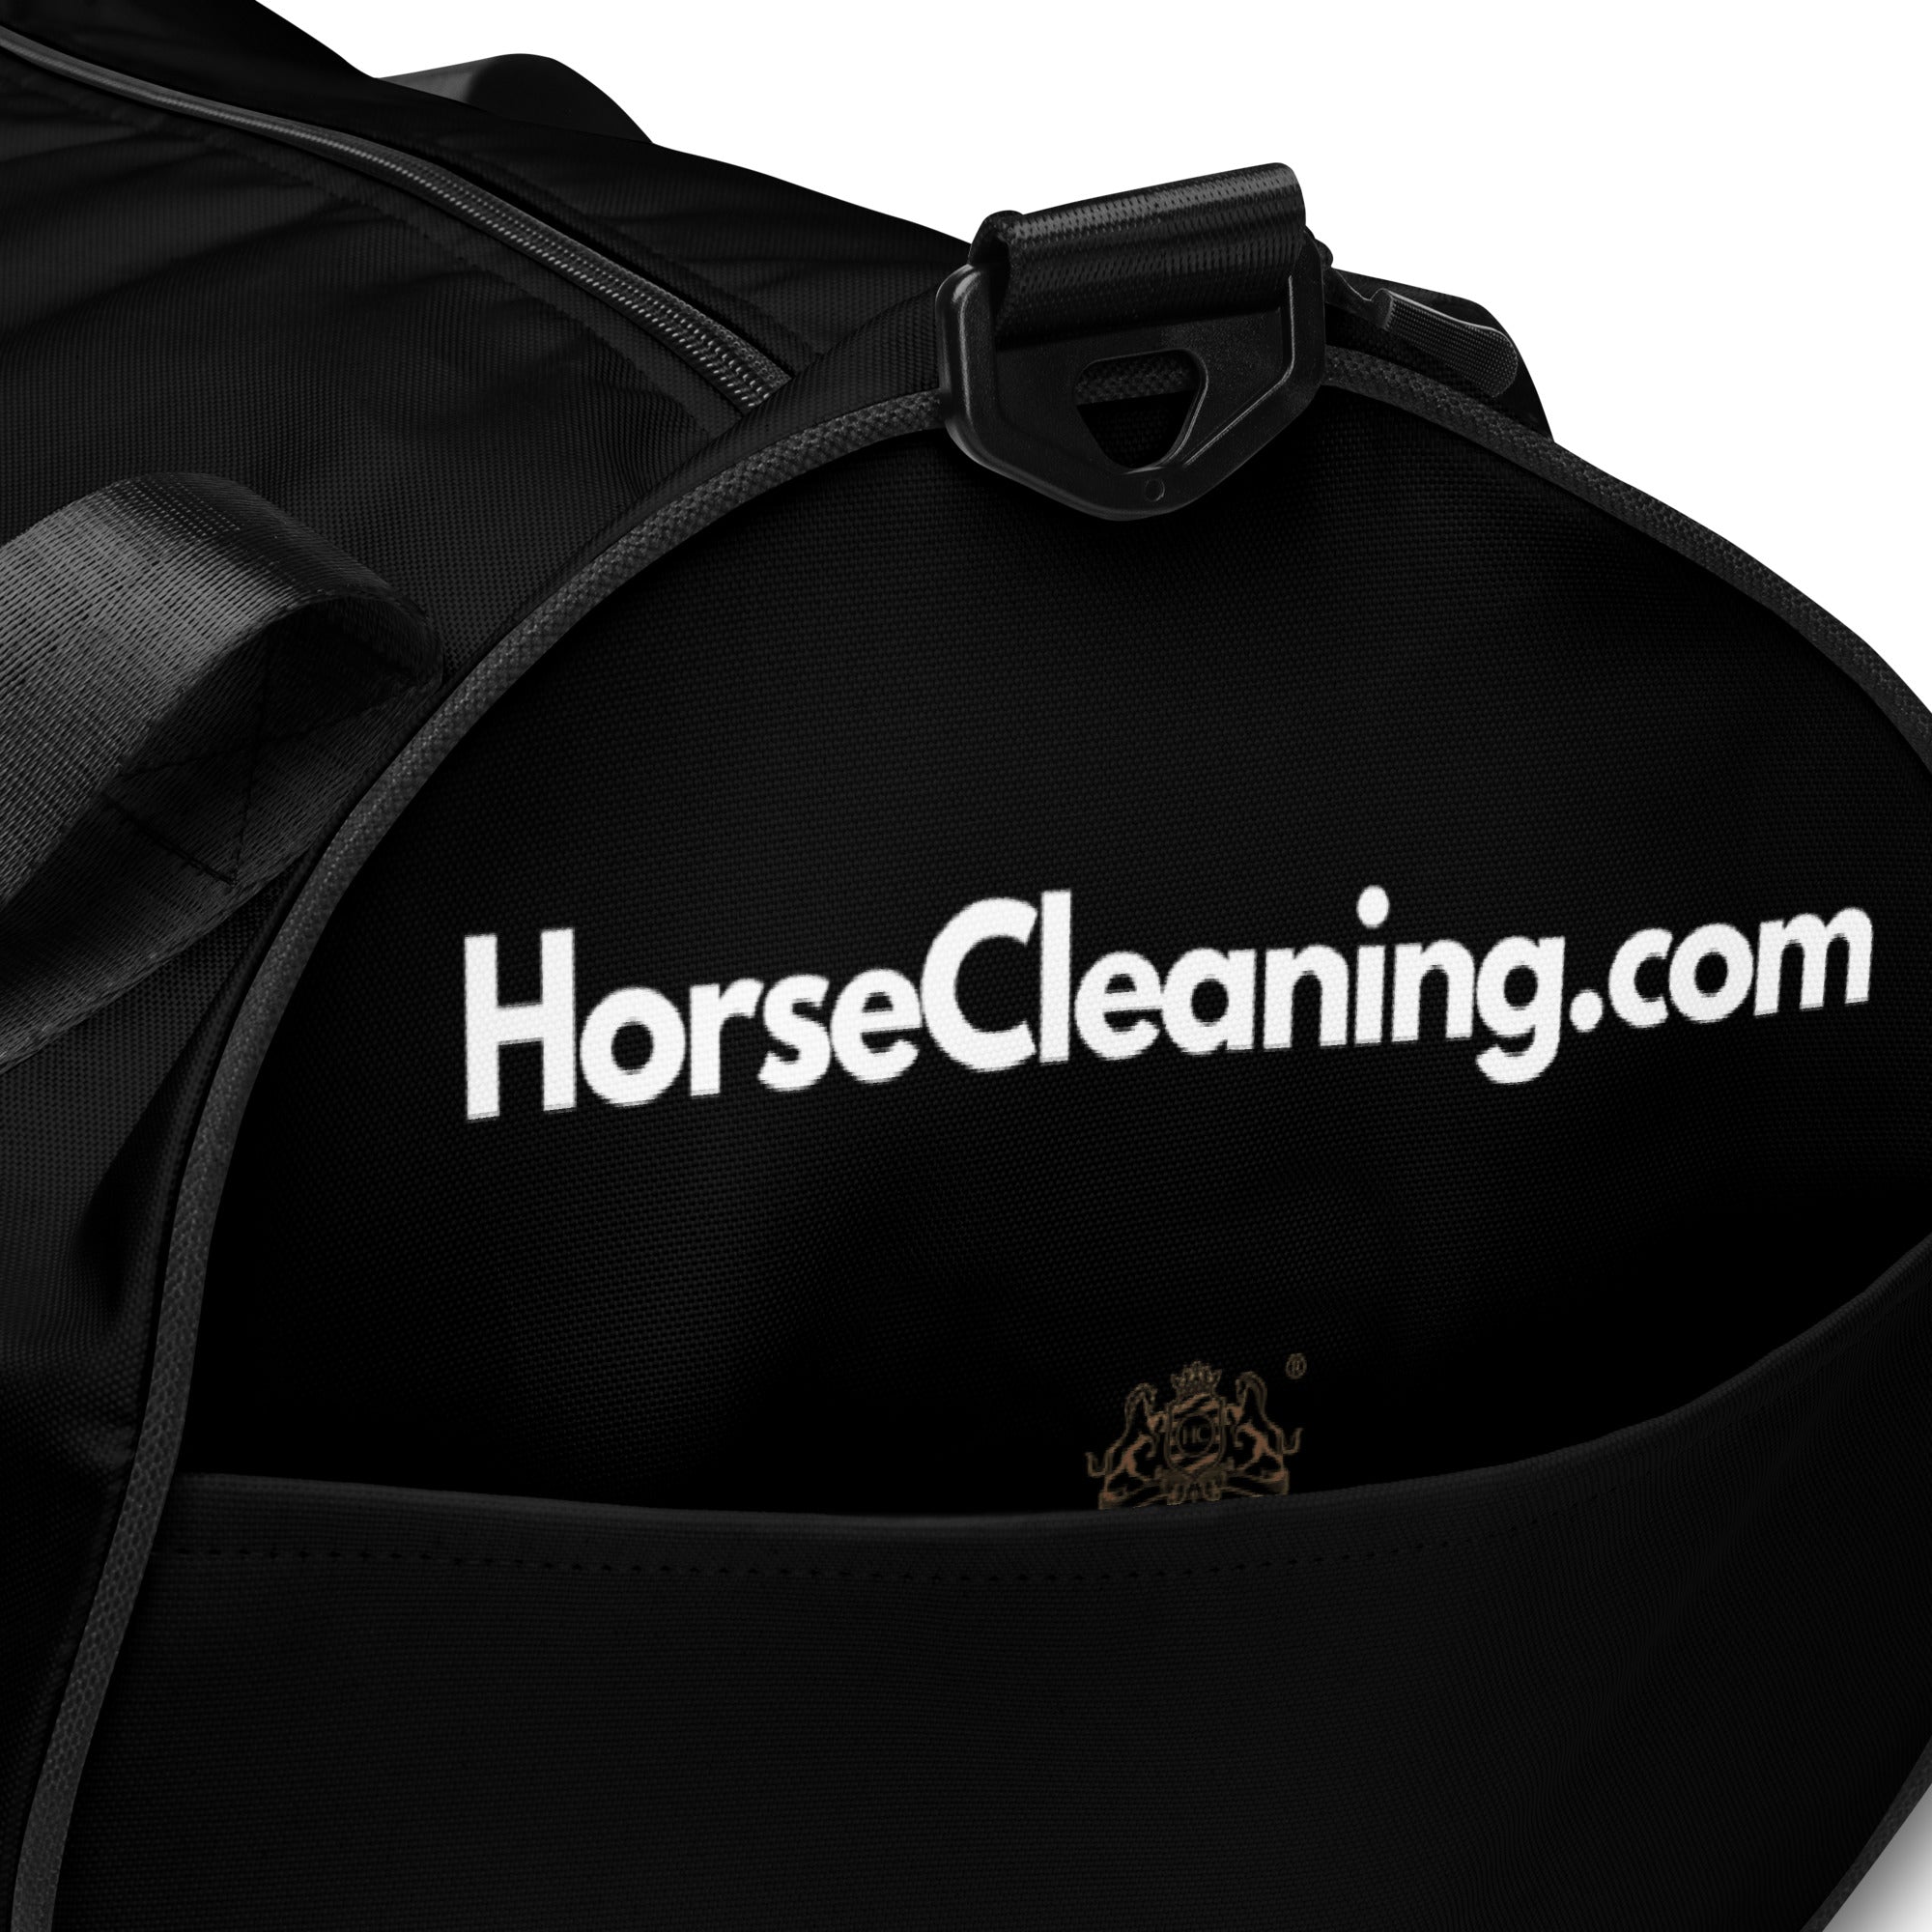 HorseCleaning.com Print Gym Bag - Horse Cleaning Masters Of Shampoos ™